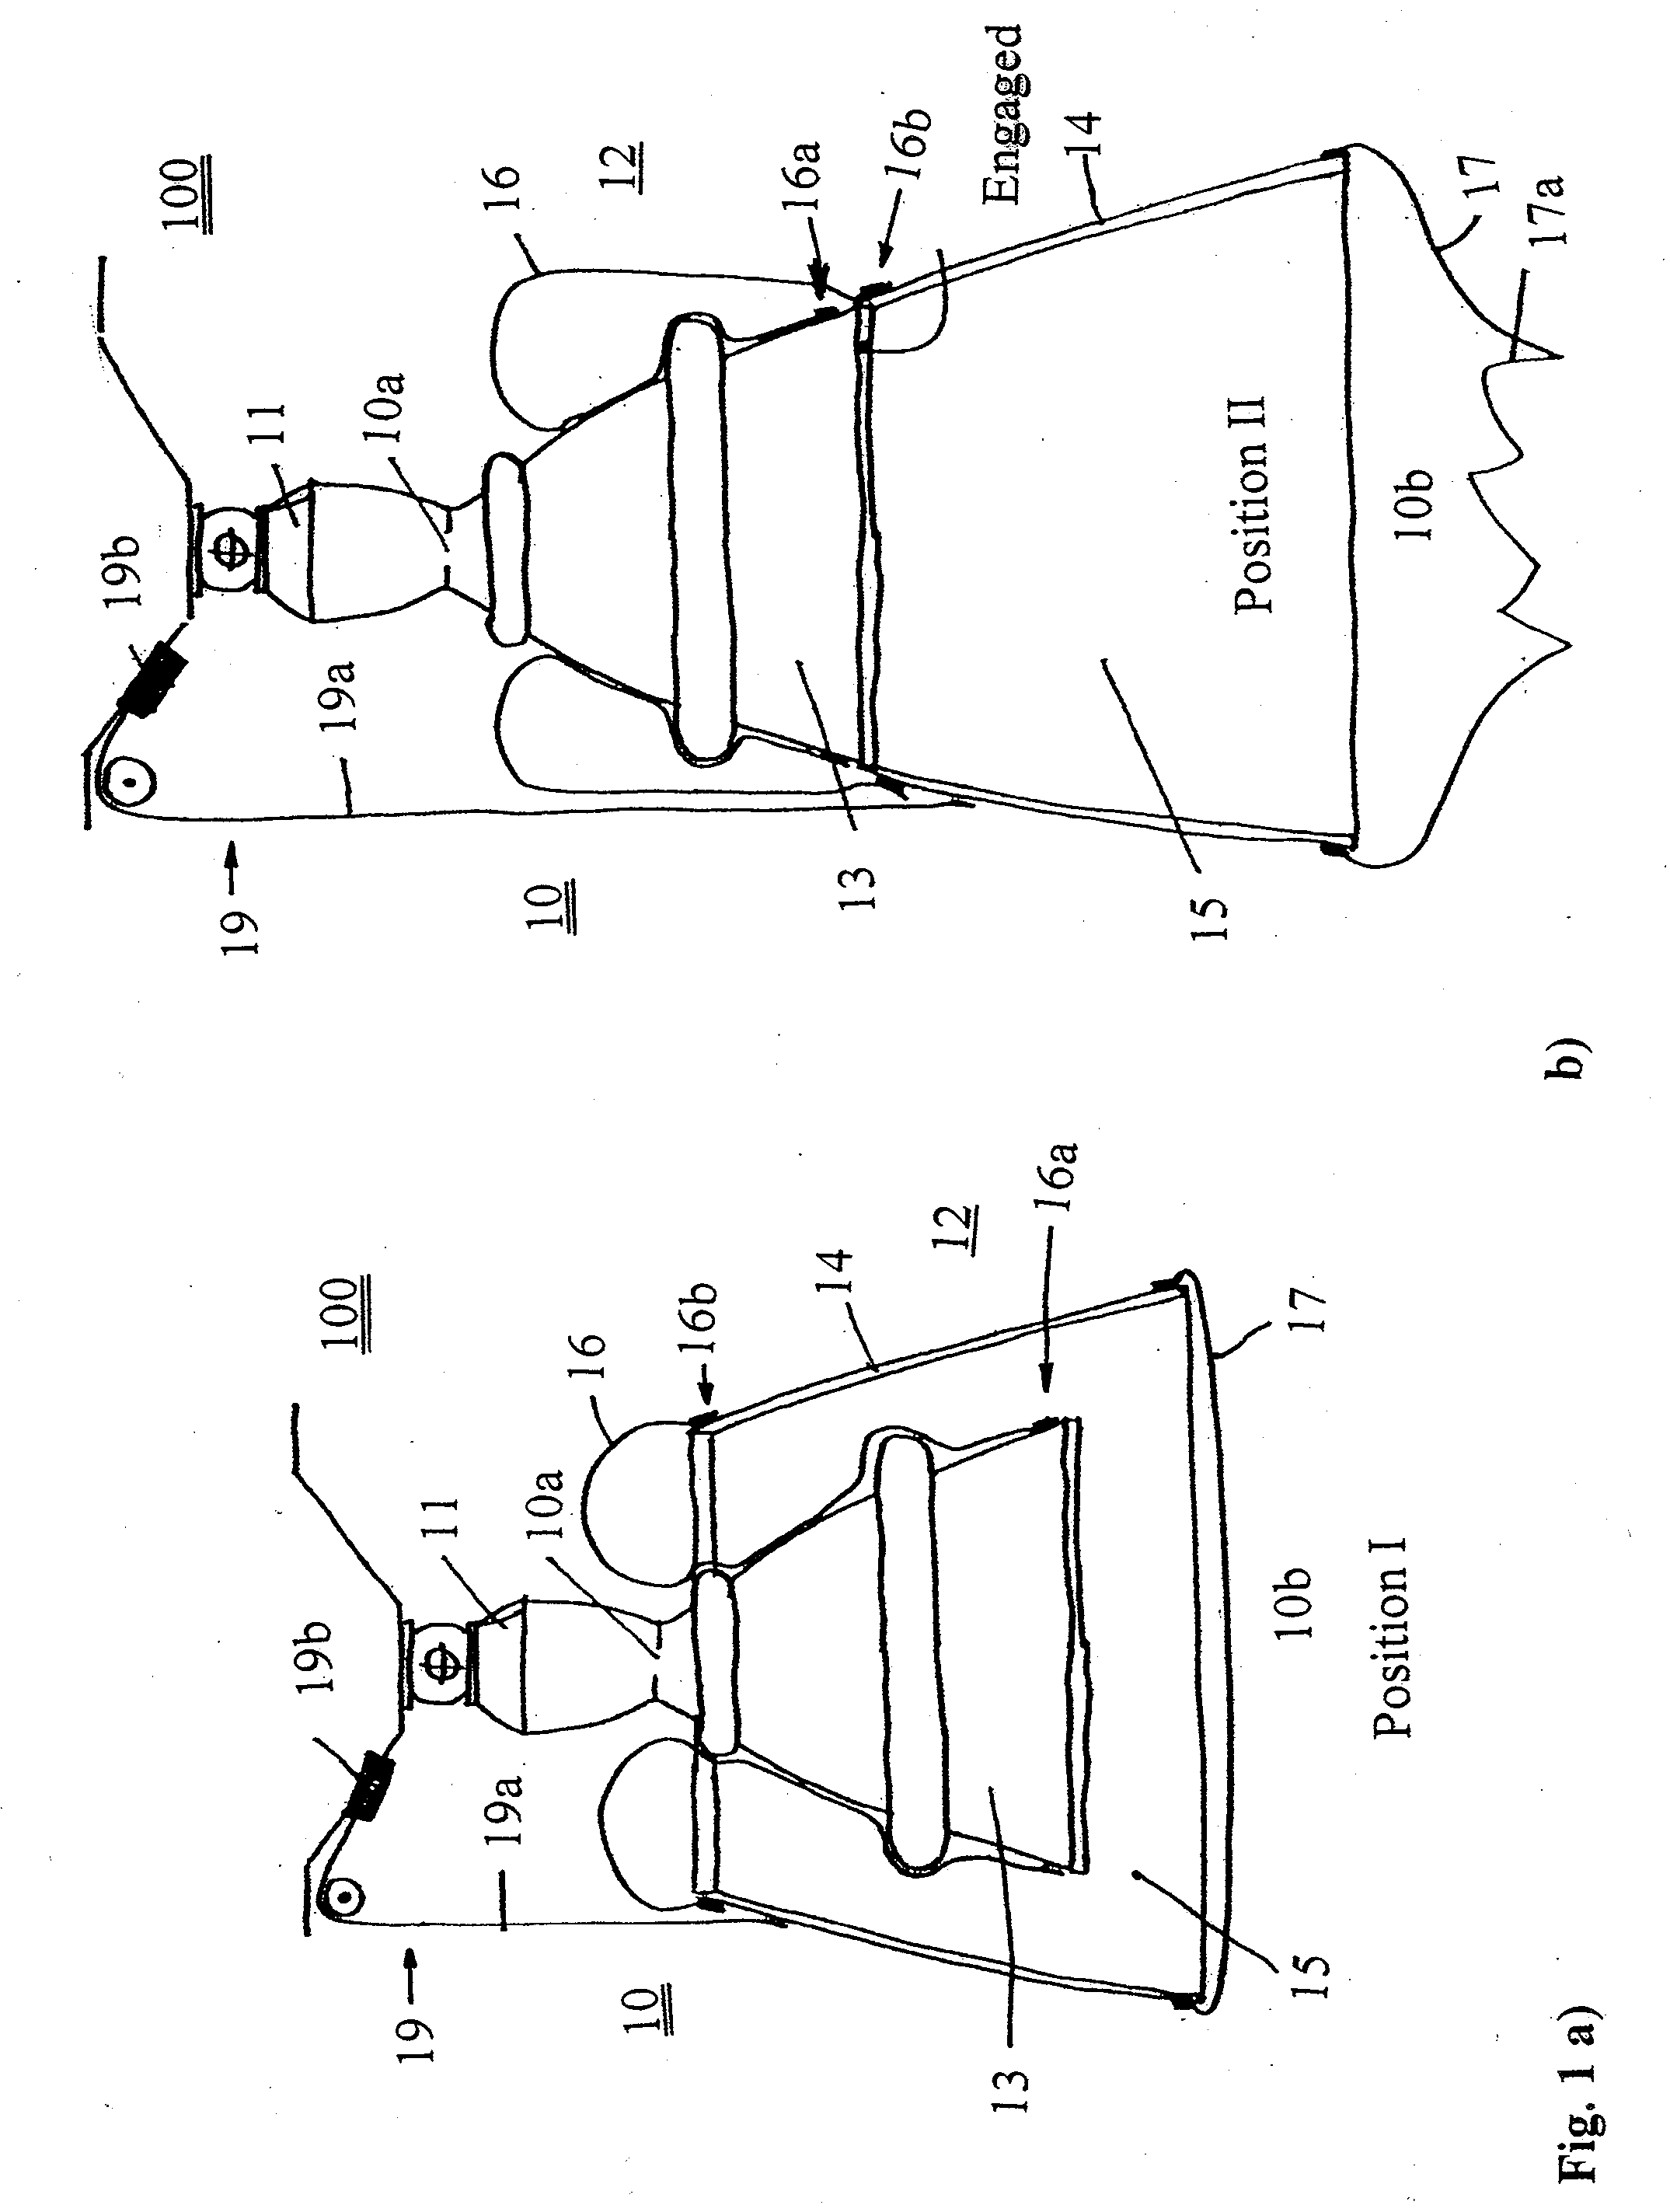 Extendible exhaust nozzle bell for a rocket engine